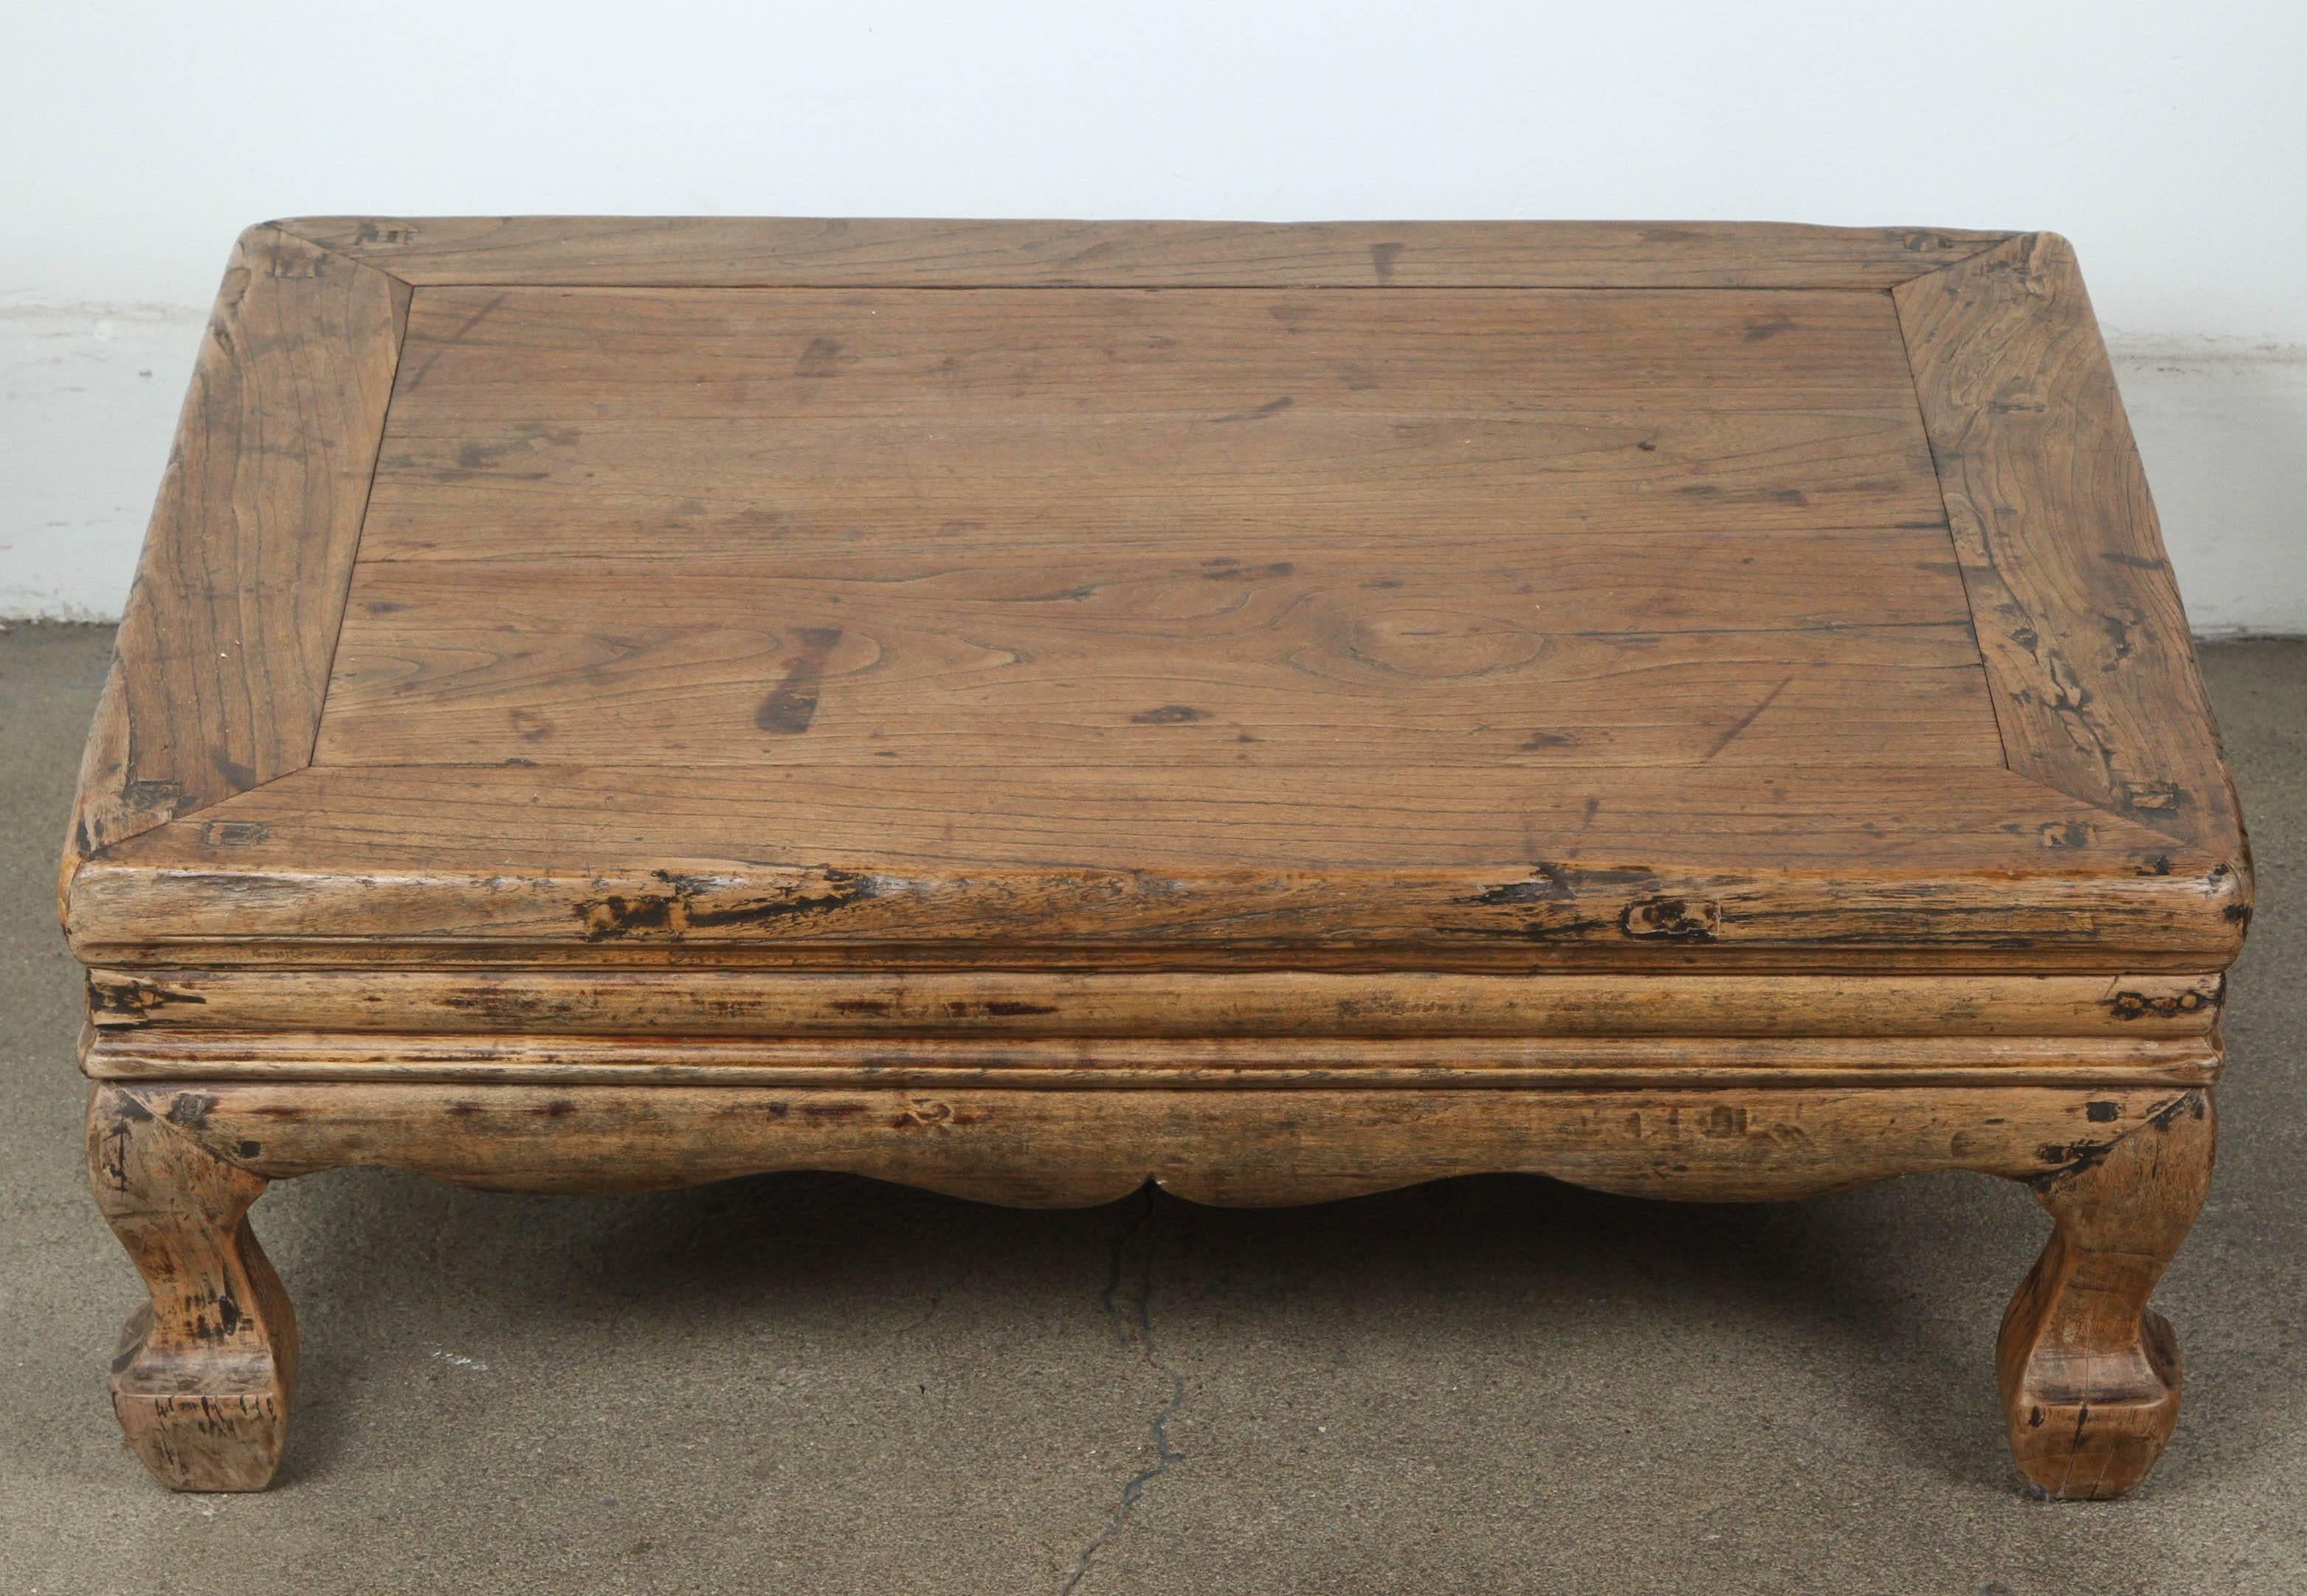 A 19th century Chinese elmwood low table.
Very nice antique patina.